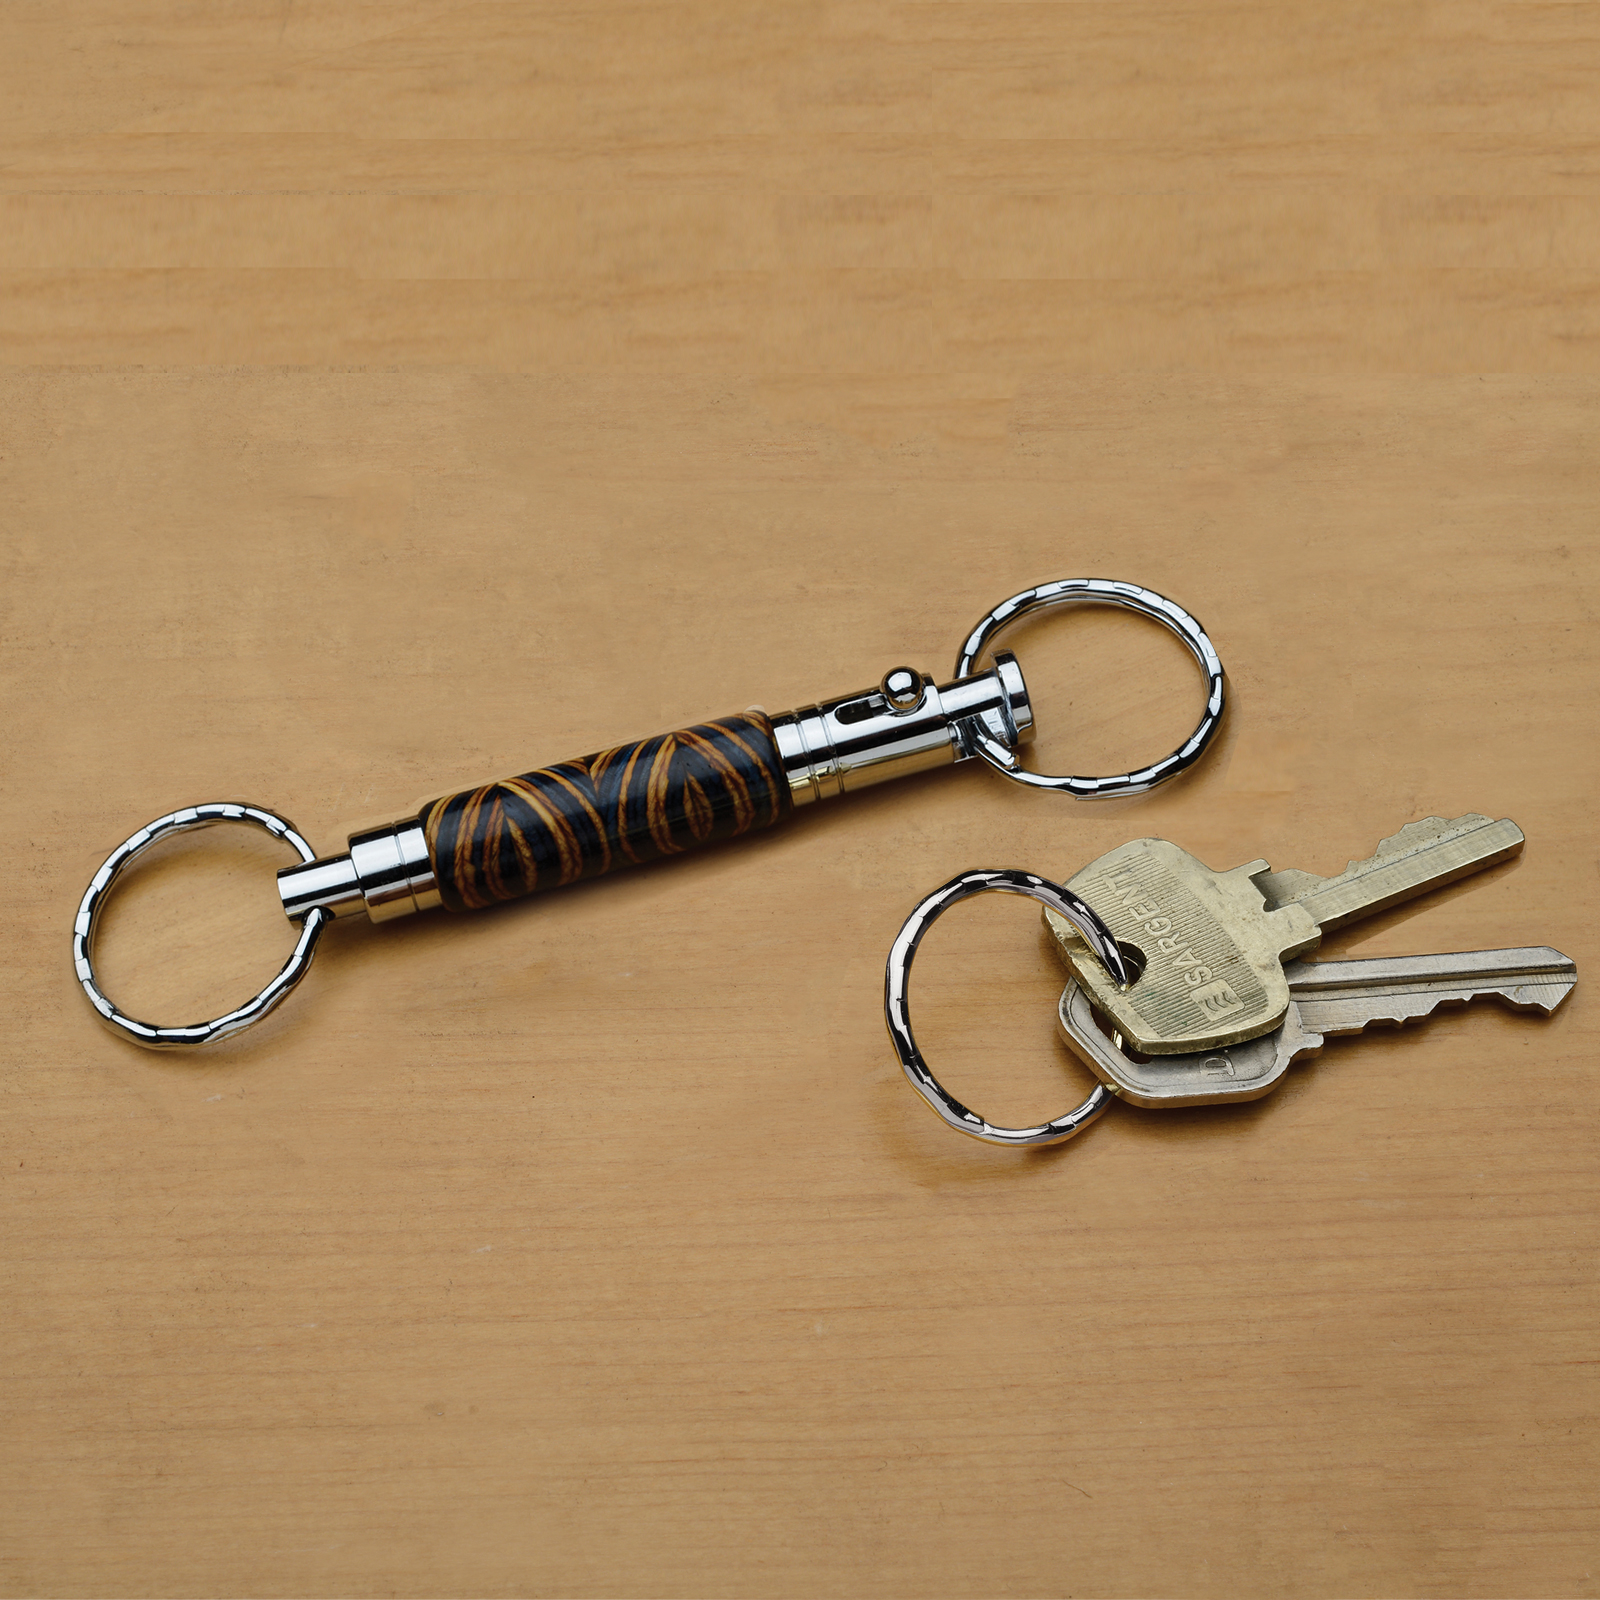 Secret Compartment Brushed Satin Key Chain Kit at Penn State Industries